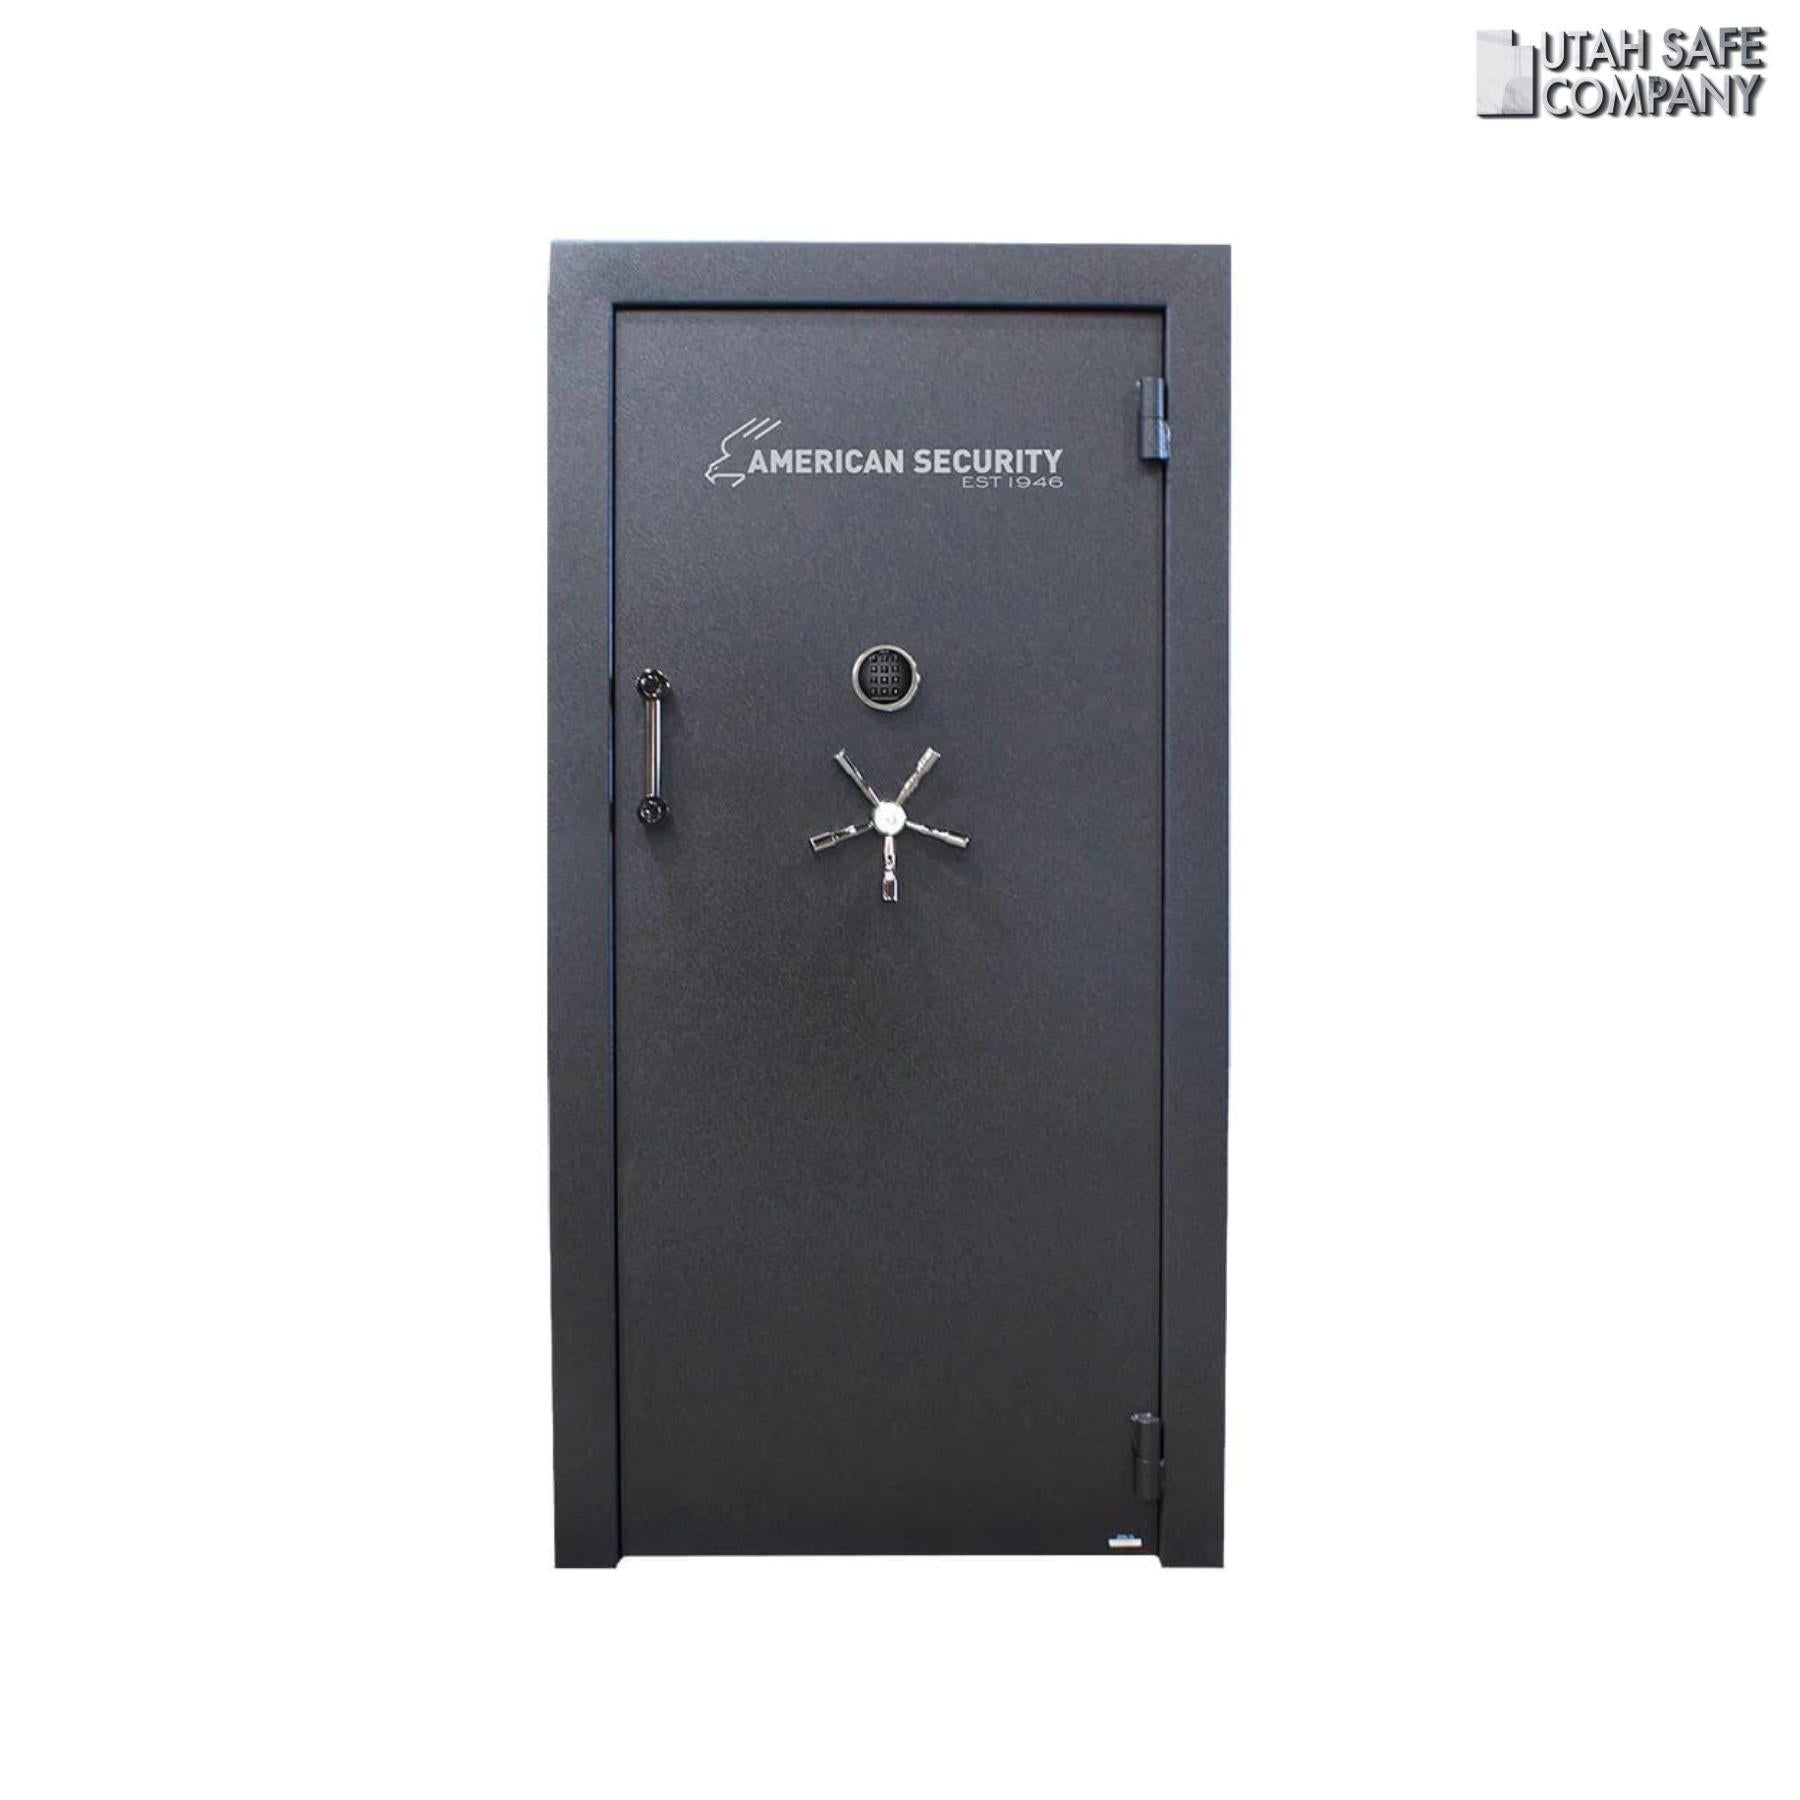 American Security 8030BFQ Out Swing Vault Door - Utah Safe Company